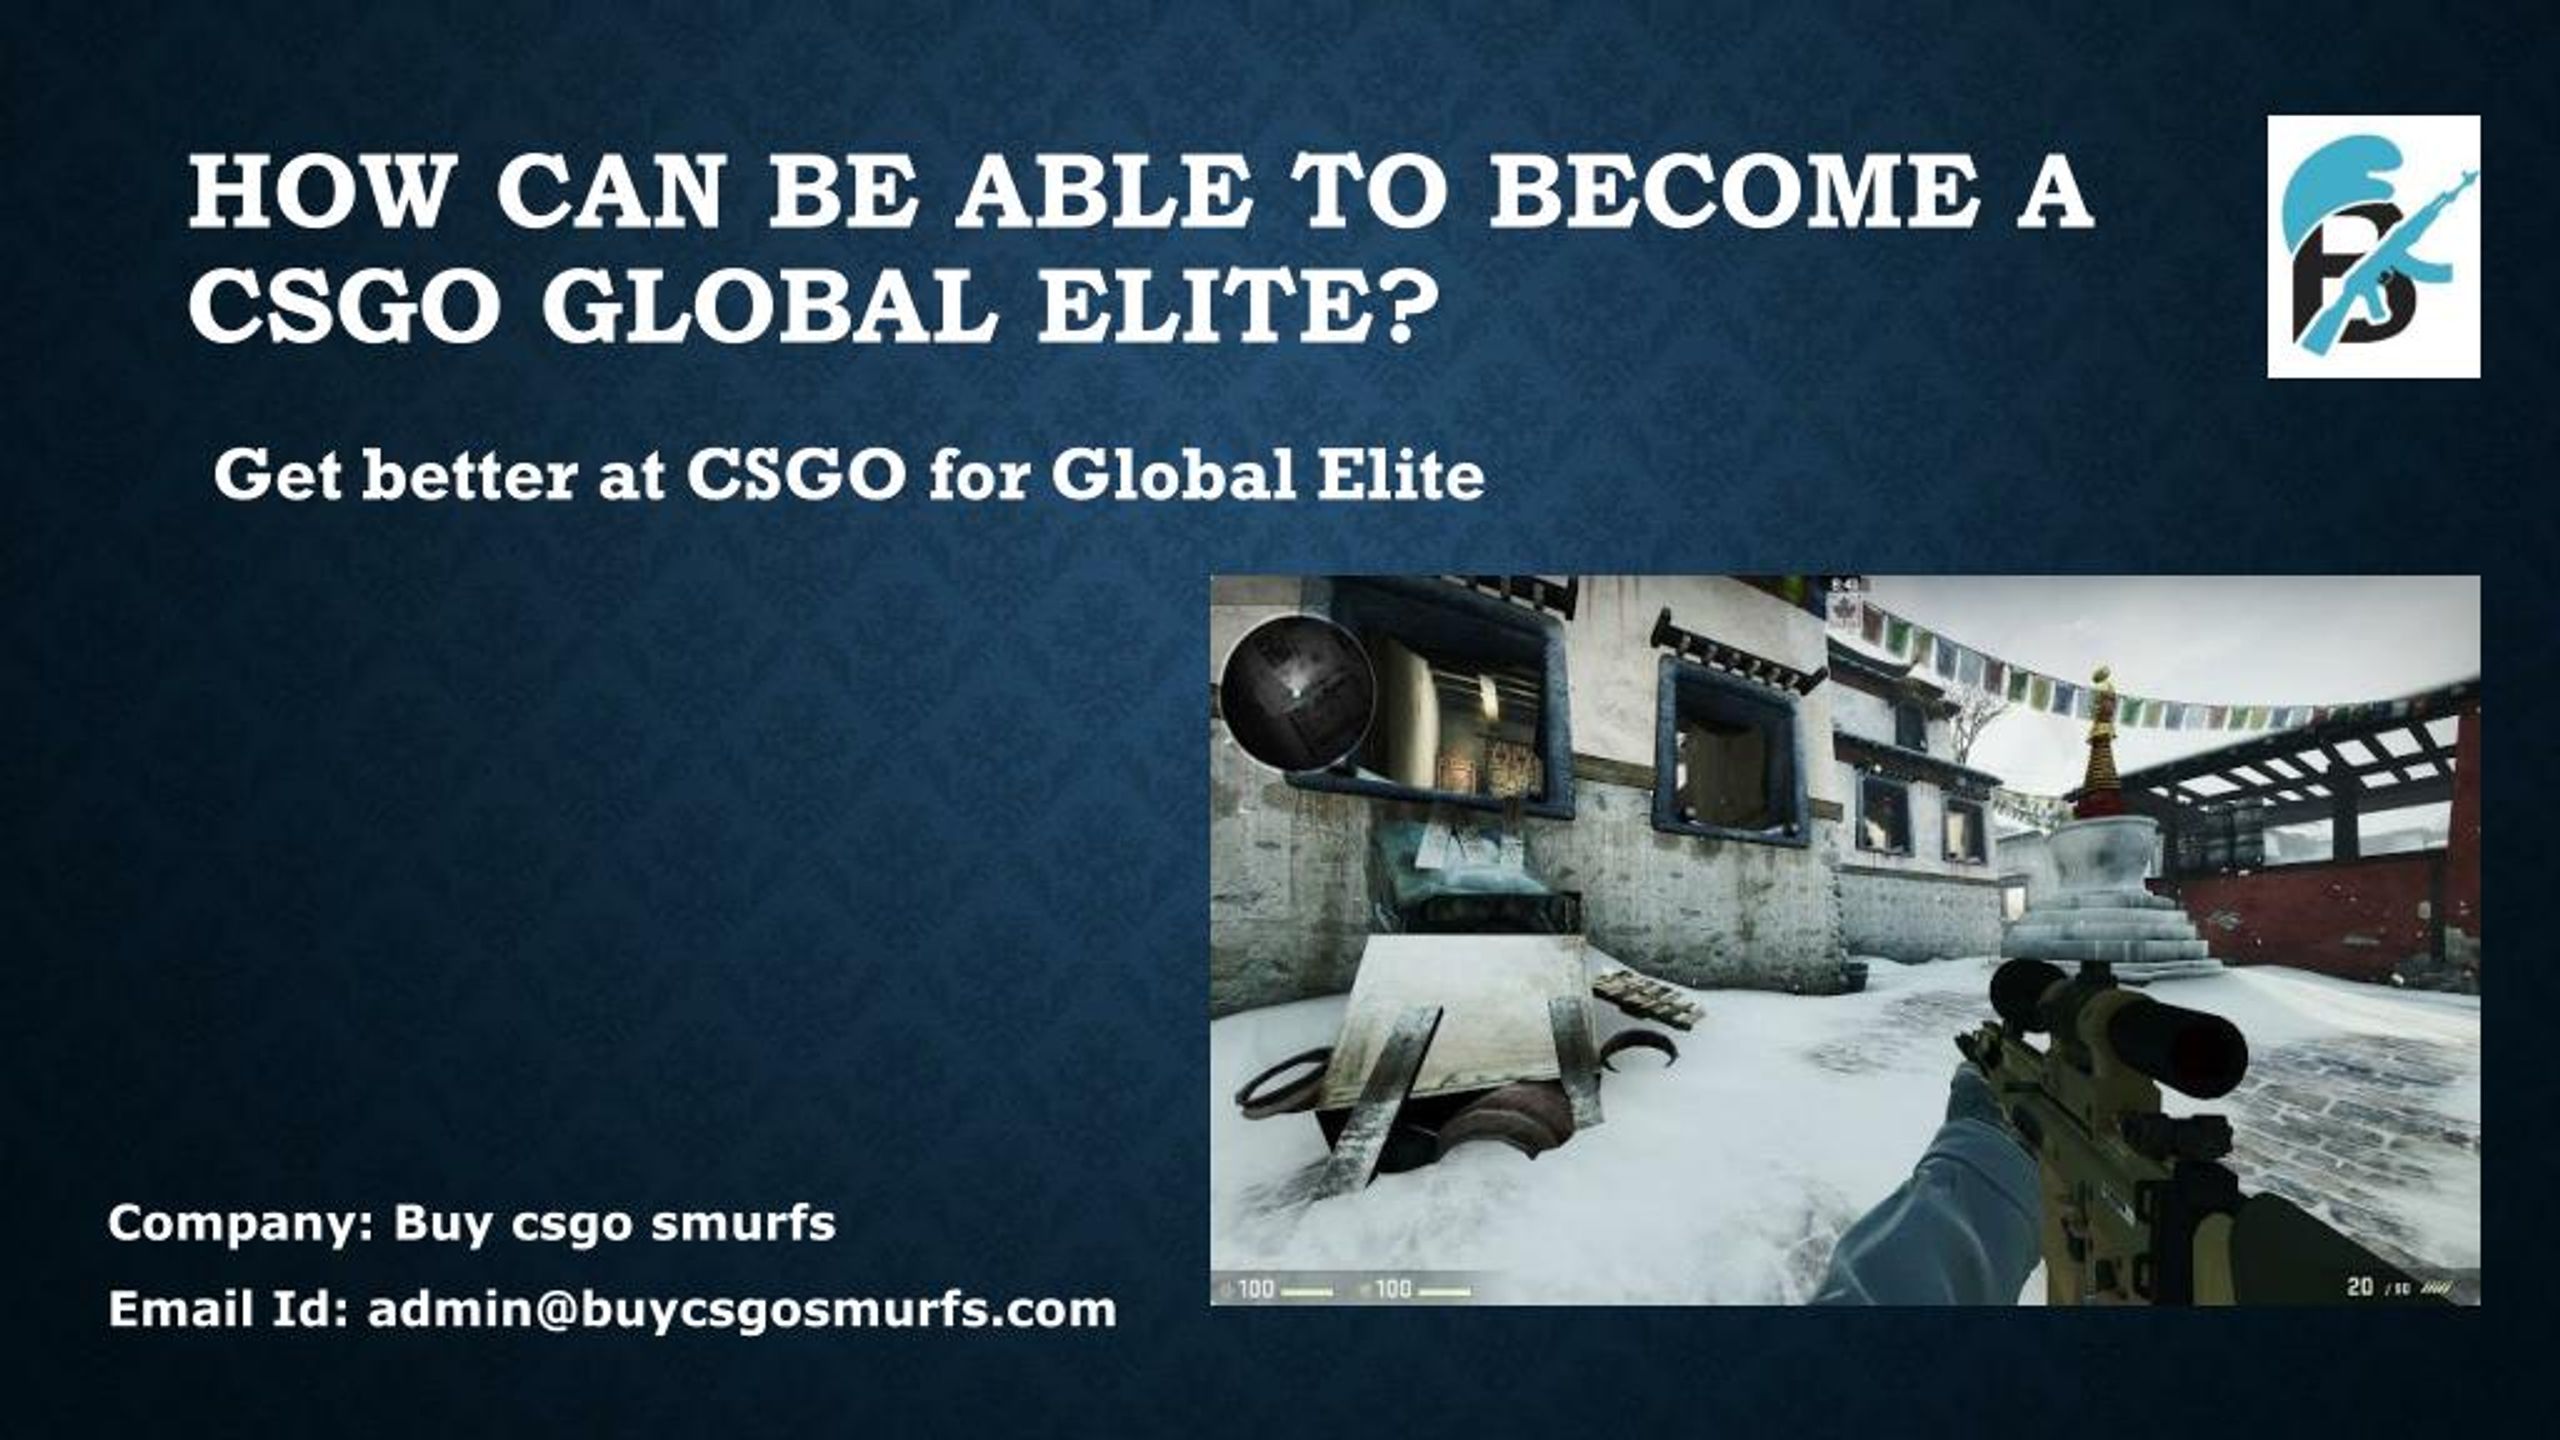 Ppt How Can Be Able To Become A Csgo Global Elite Powerpoint Presentation Id